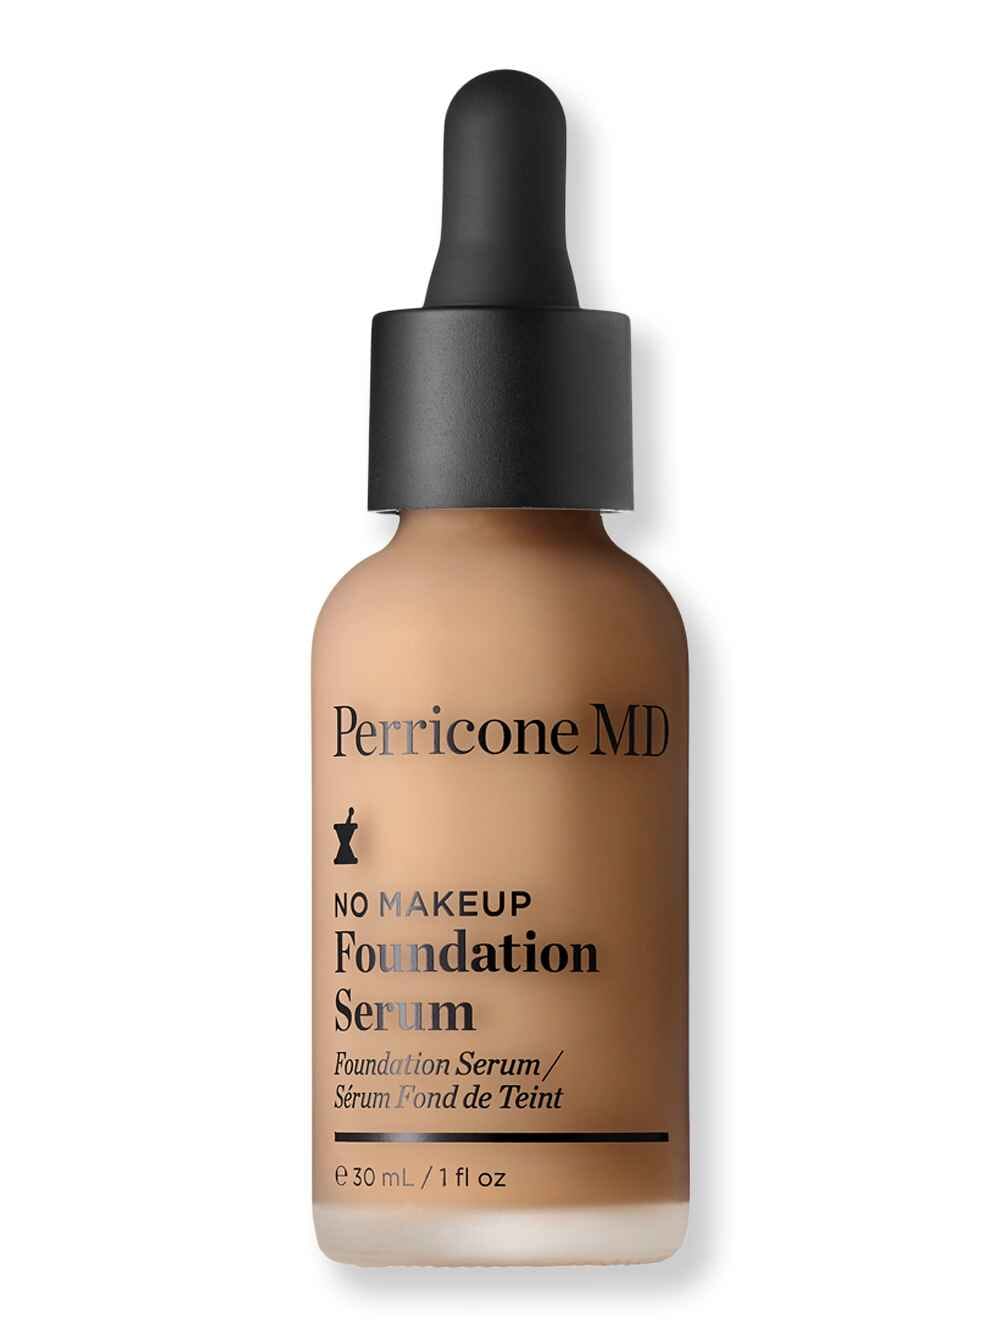 Perricone MD Perricone MD No Makeup Foundation Serum Broad Spectrum SPF 20 Beige 1 oz30 ml Tinted Moisturizers & Foundations 